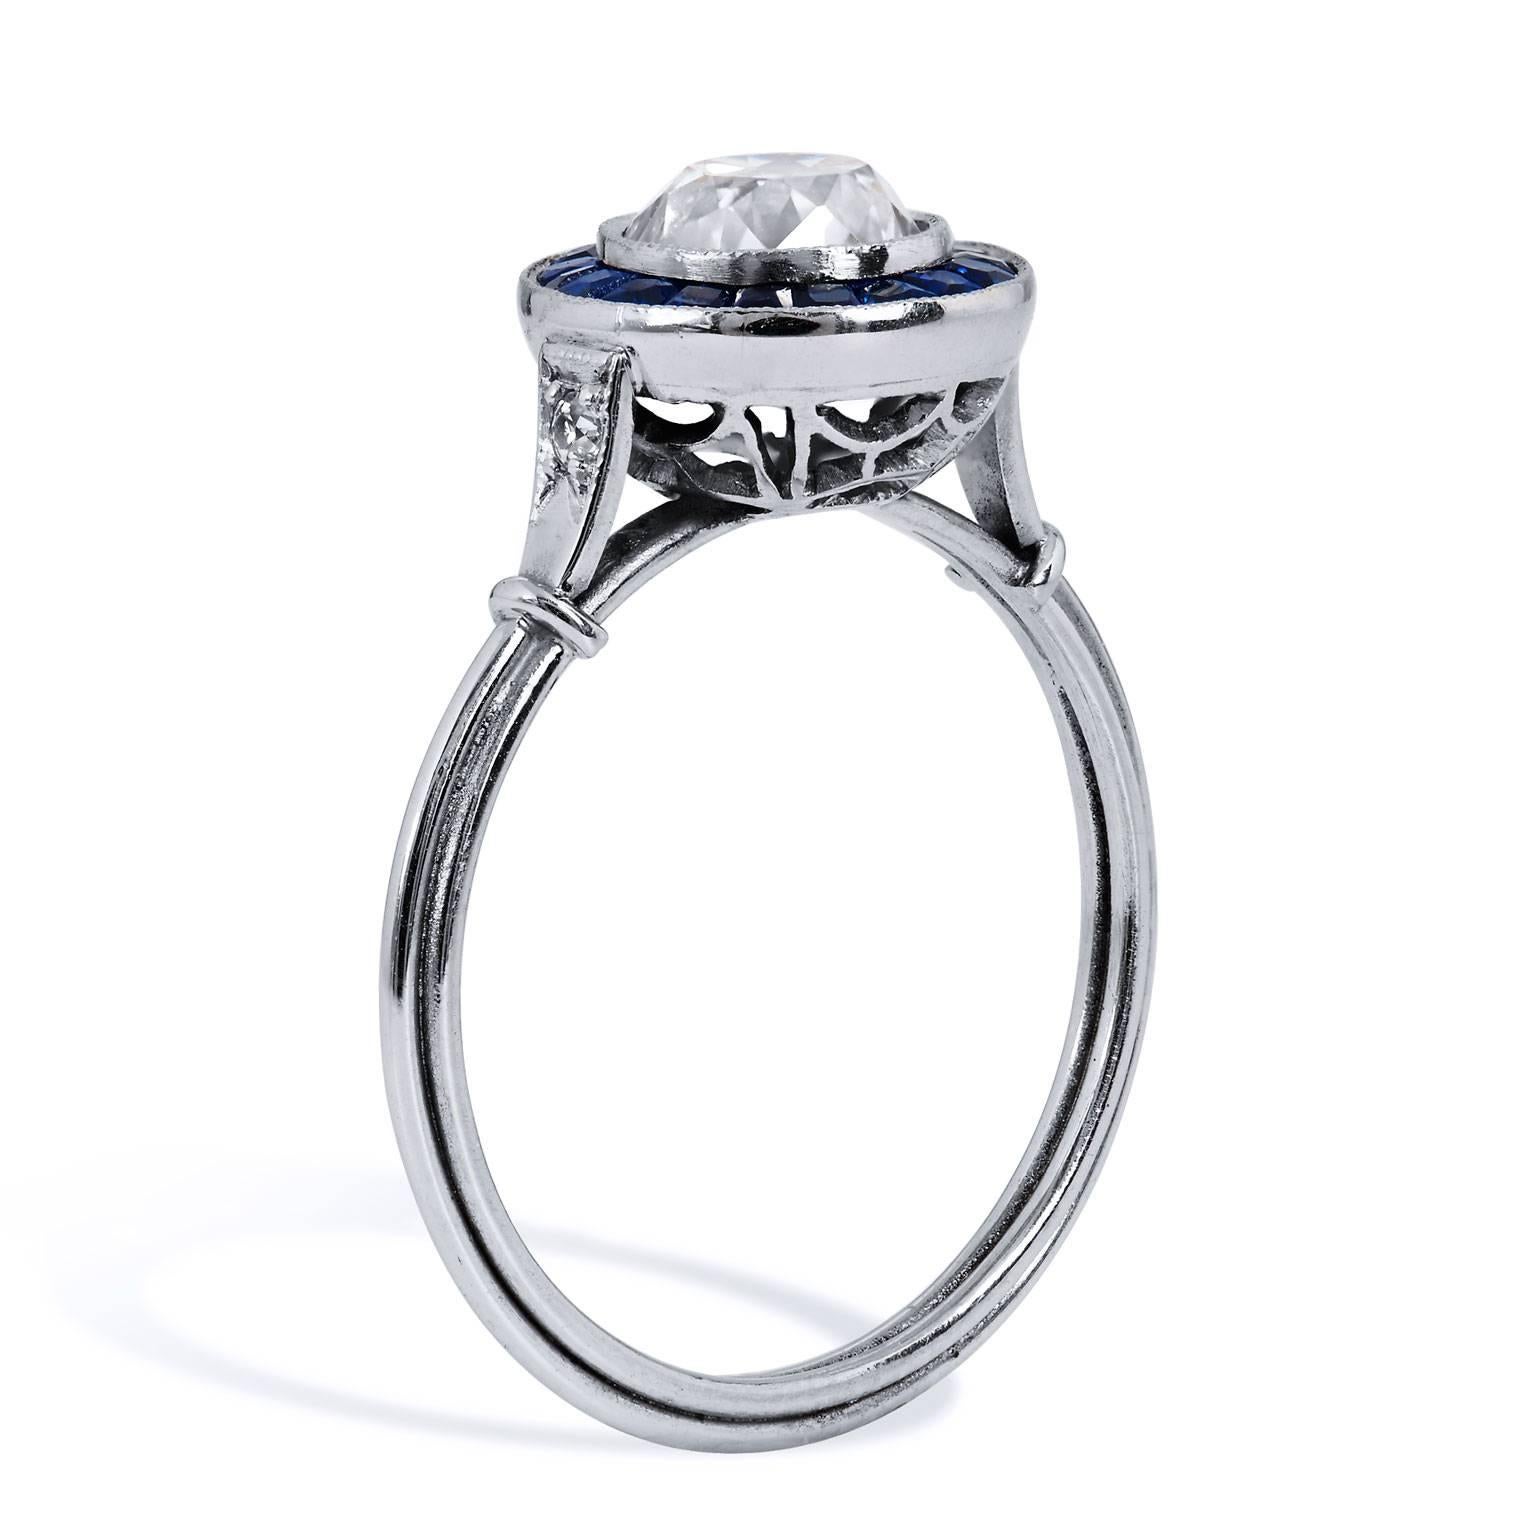 Crafted in platinum, this ring features a 1.16 carat L/M/SI1 graded Old European cut center diamond surrounded by 0.70 carat of caliber cut channel set sapphires. The ring features a thin shank for a very soft and feminine feel that is set with pave